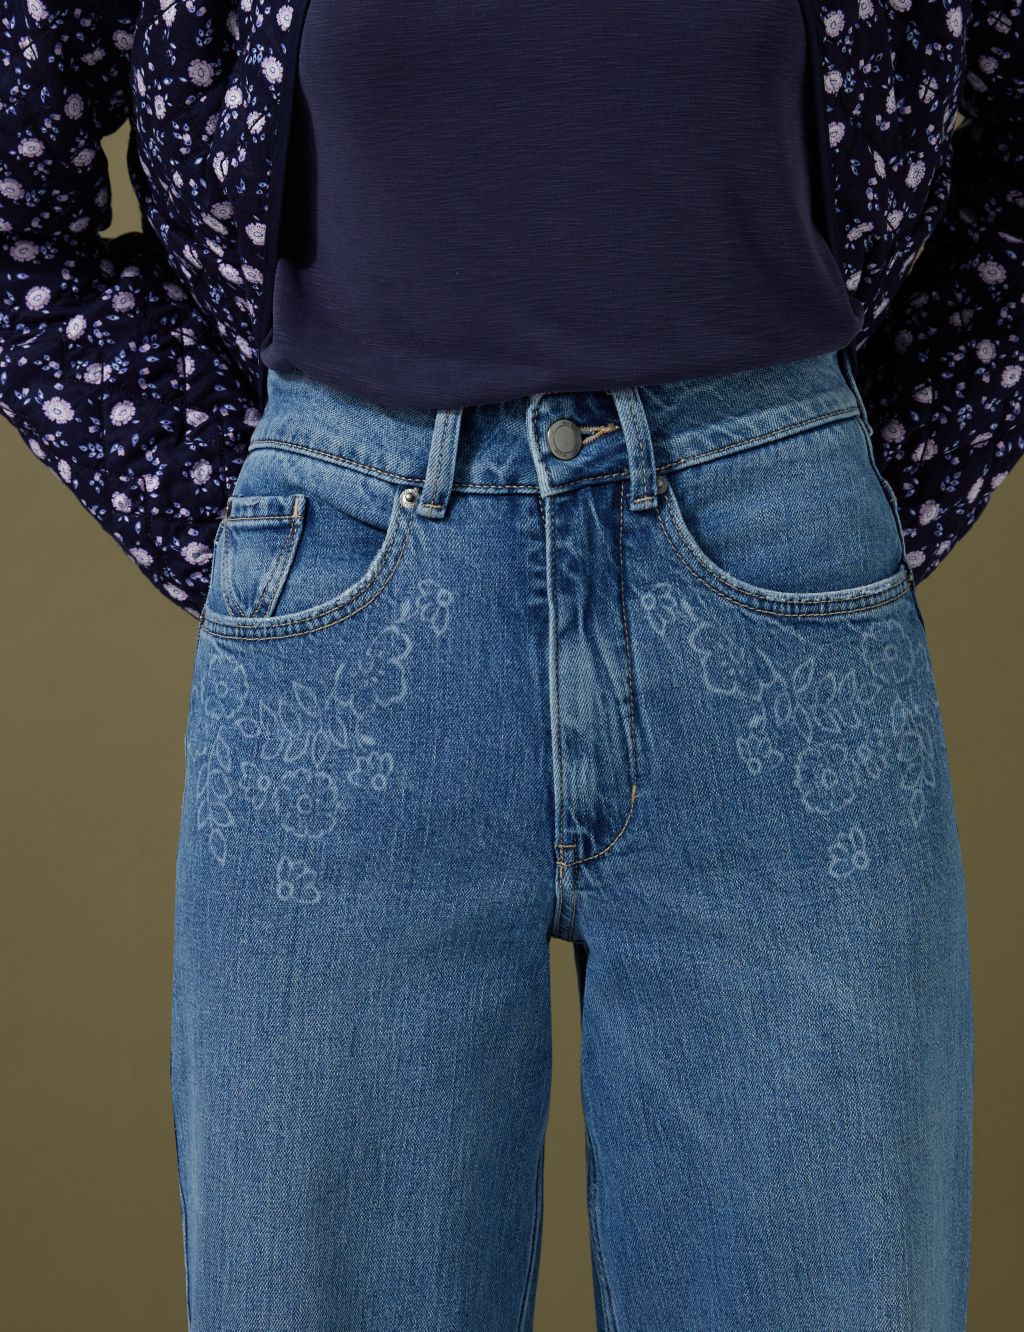 High Waisted Floral Wide Leg Jeans image 3